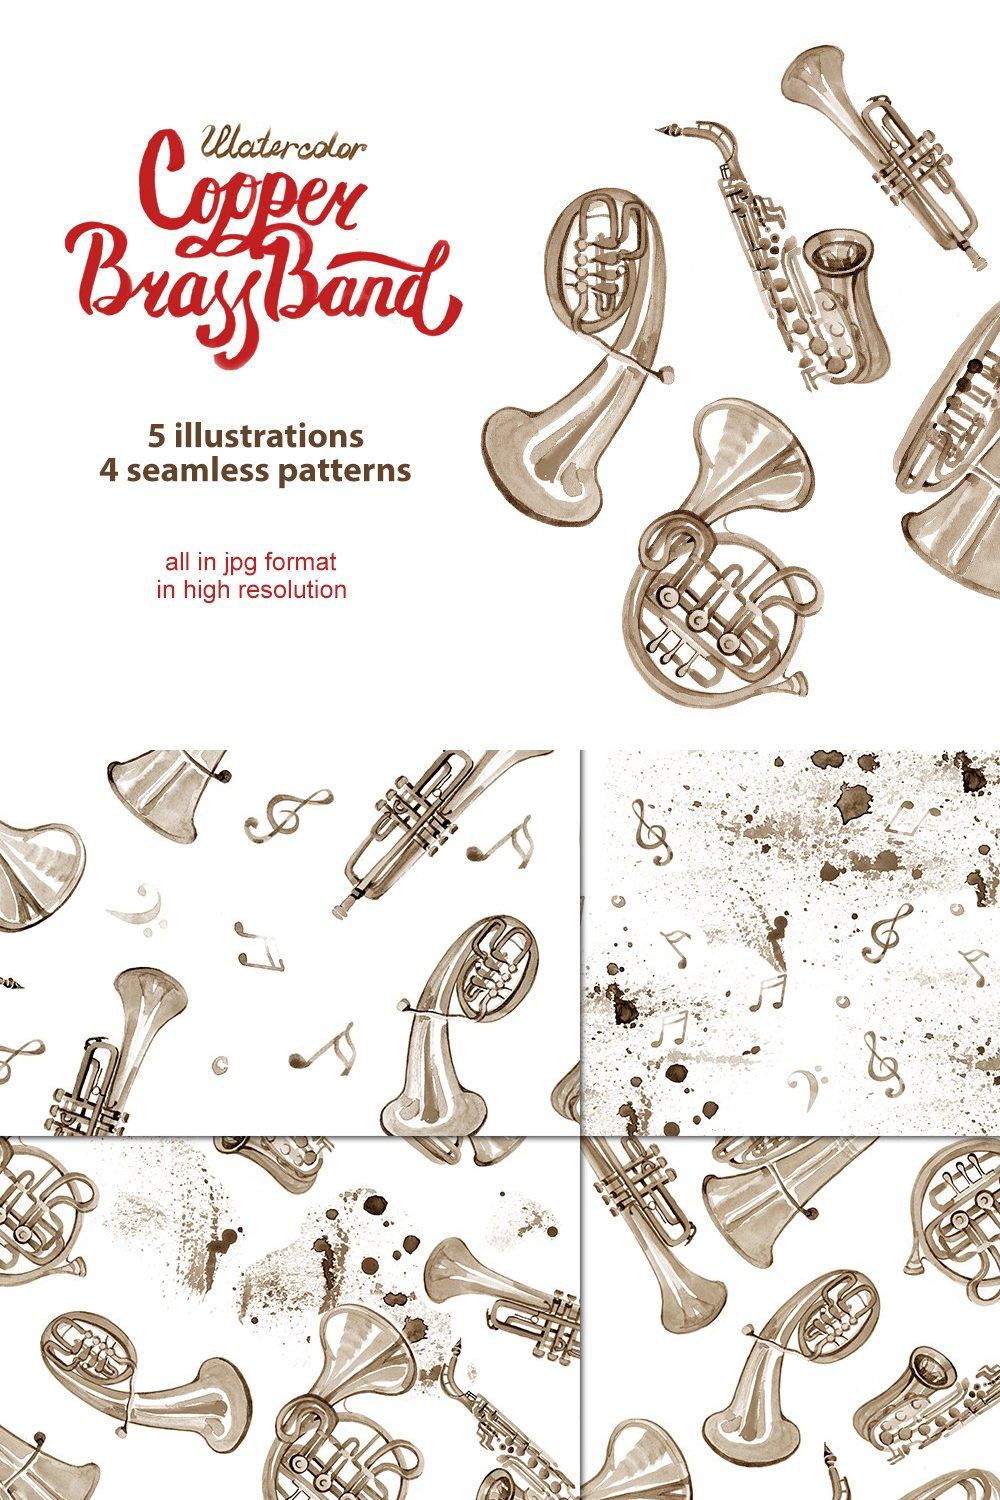 Copper brass band. Vol.2 pinterest preview image.